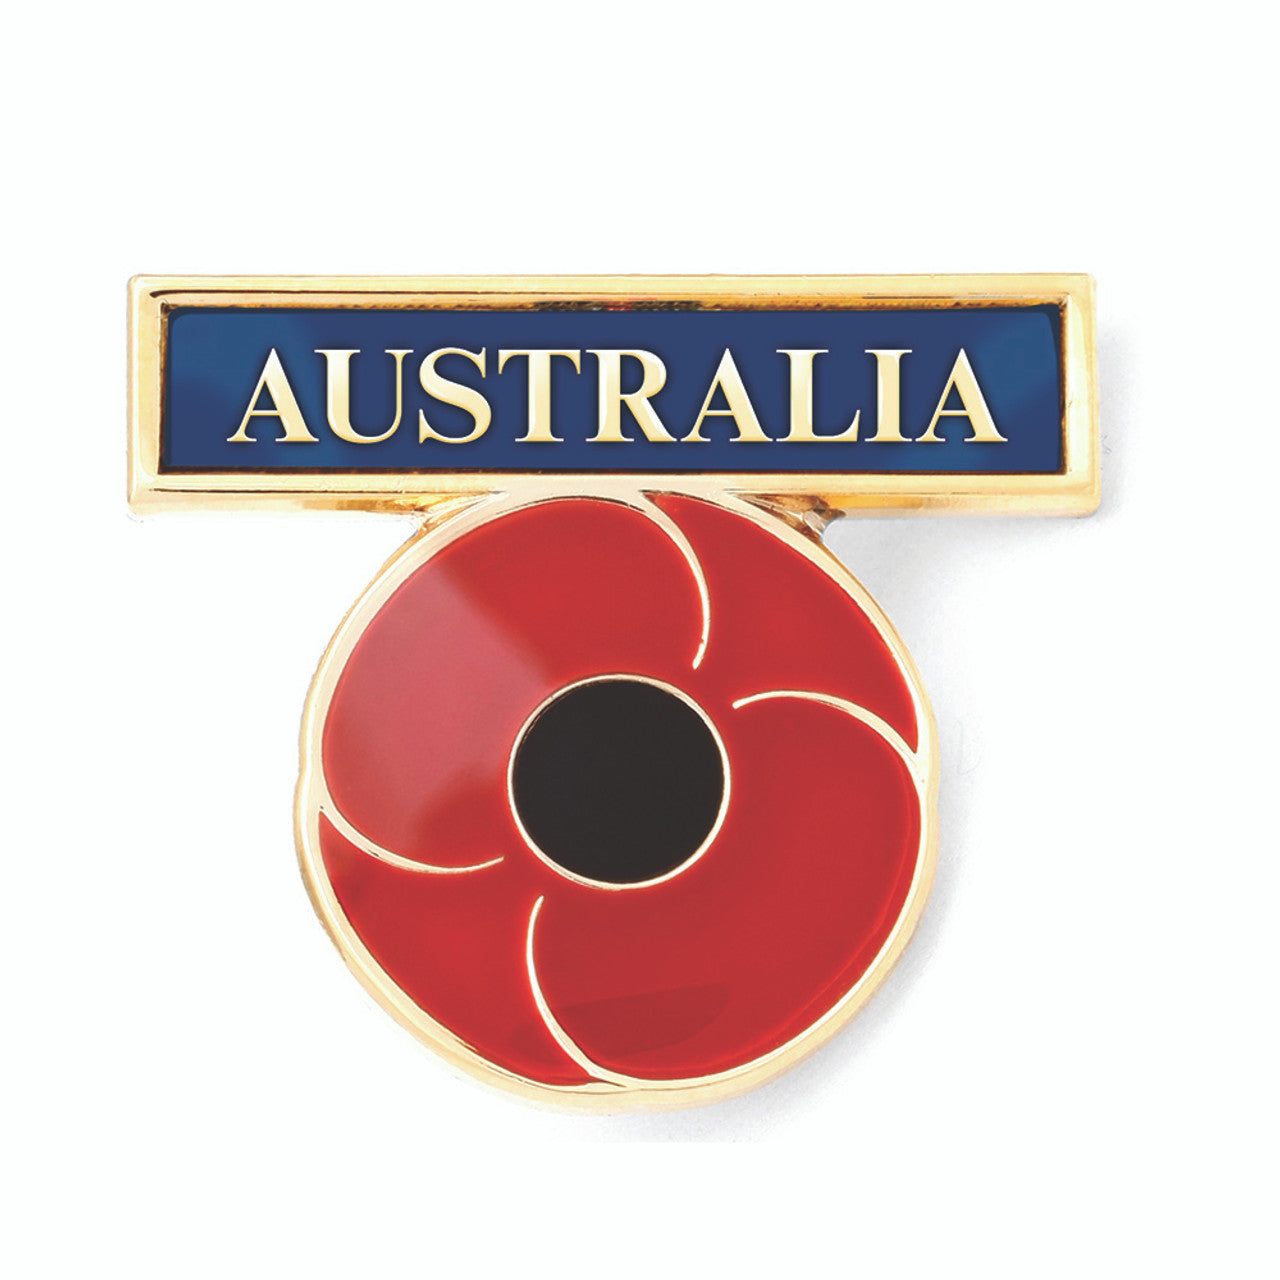 The HMAS Darwin lapel pin is the perfect accessory for military enthusiasts. Made from gold-plated zinc alloy with enamel fill, this lapel pin is not only durable but also visually stunning. www.defenceqstore.com.au